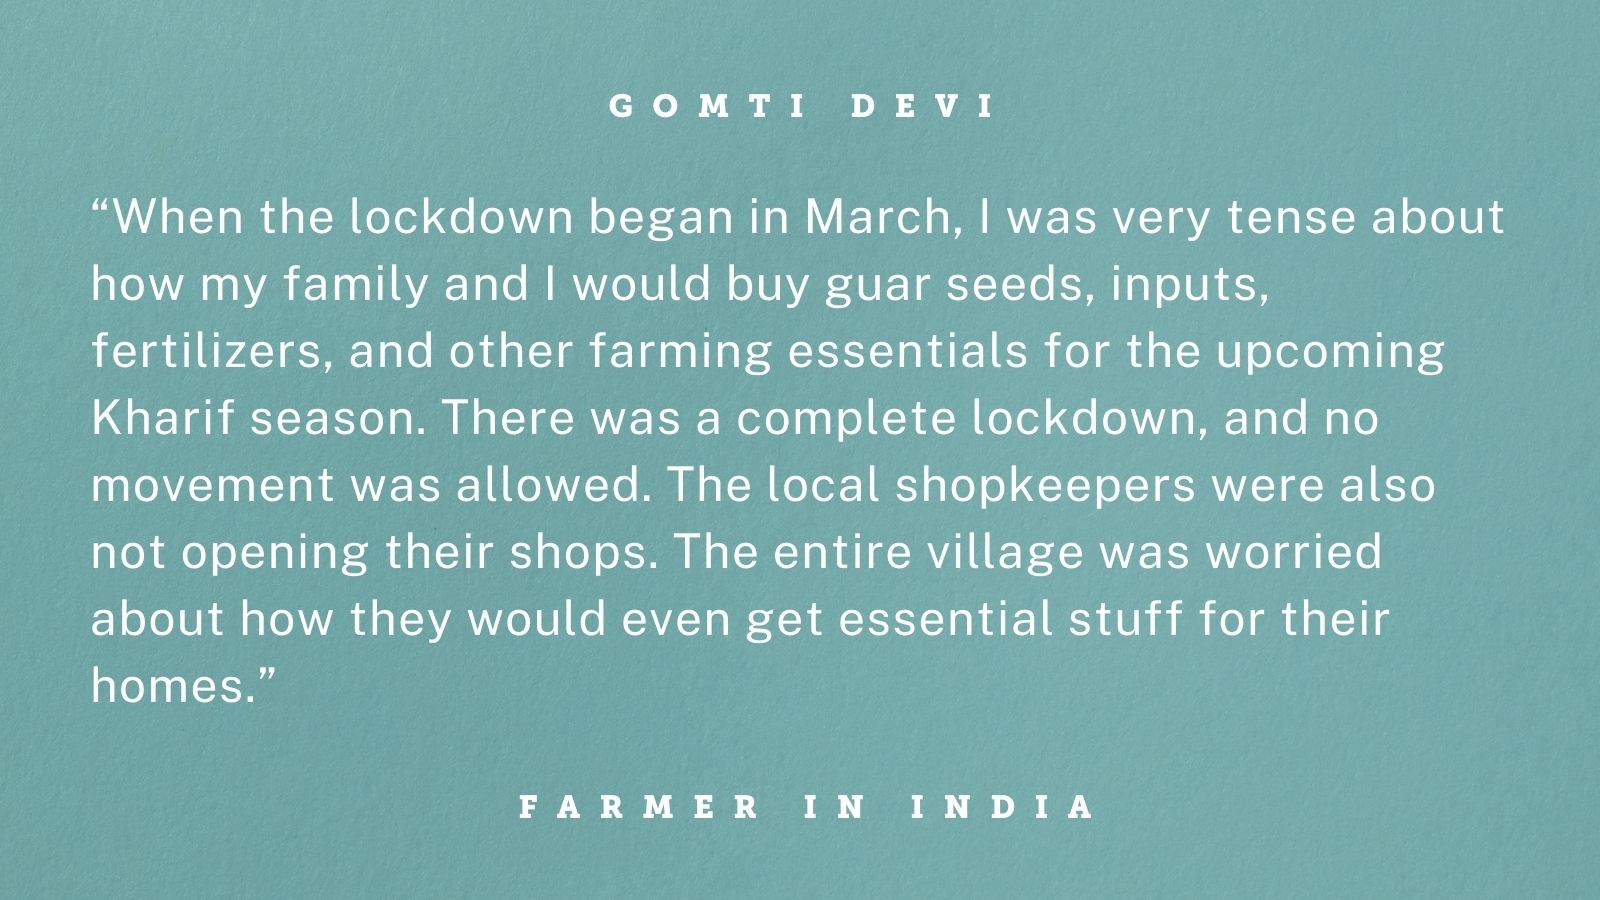 Quote from Gomti Devi, a smallholder guar farmer in Bikaner, Rajasthan, India, whose gender-inclusive training from TechnoServe helped her withstand the COVID-19 crisis. Graphic reads: “When the lockdown began in March, I was very tense about how my family and I would buy guar seeds, inputs, fertilizers, and other farming essentials for the upcoming Kharif season. There was a complete lockdown, and no movement was allowed. The local shopkeepers were also not opening their shops. The entire village was worried about how they would even get essential stuff for their homes.”